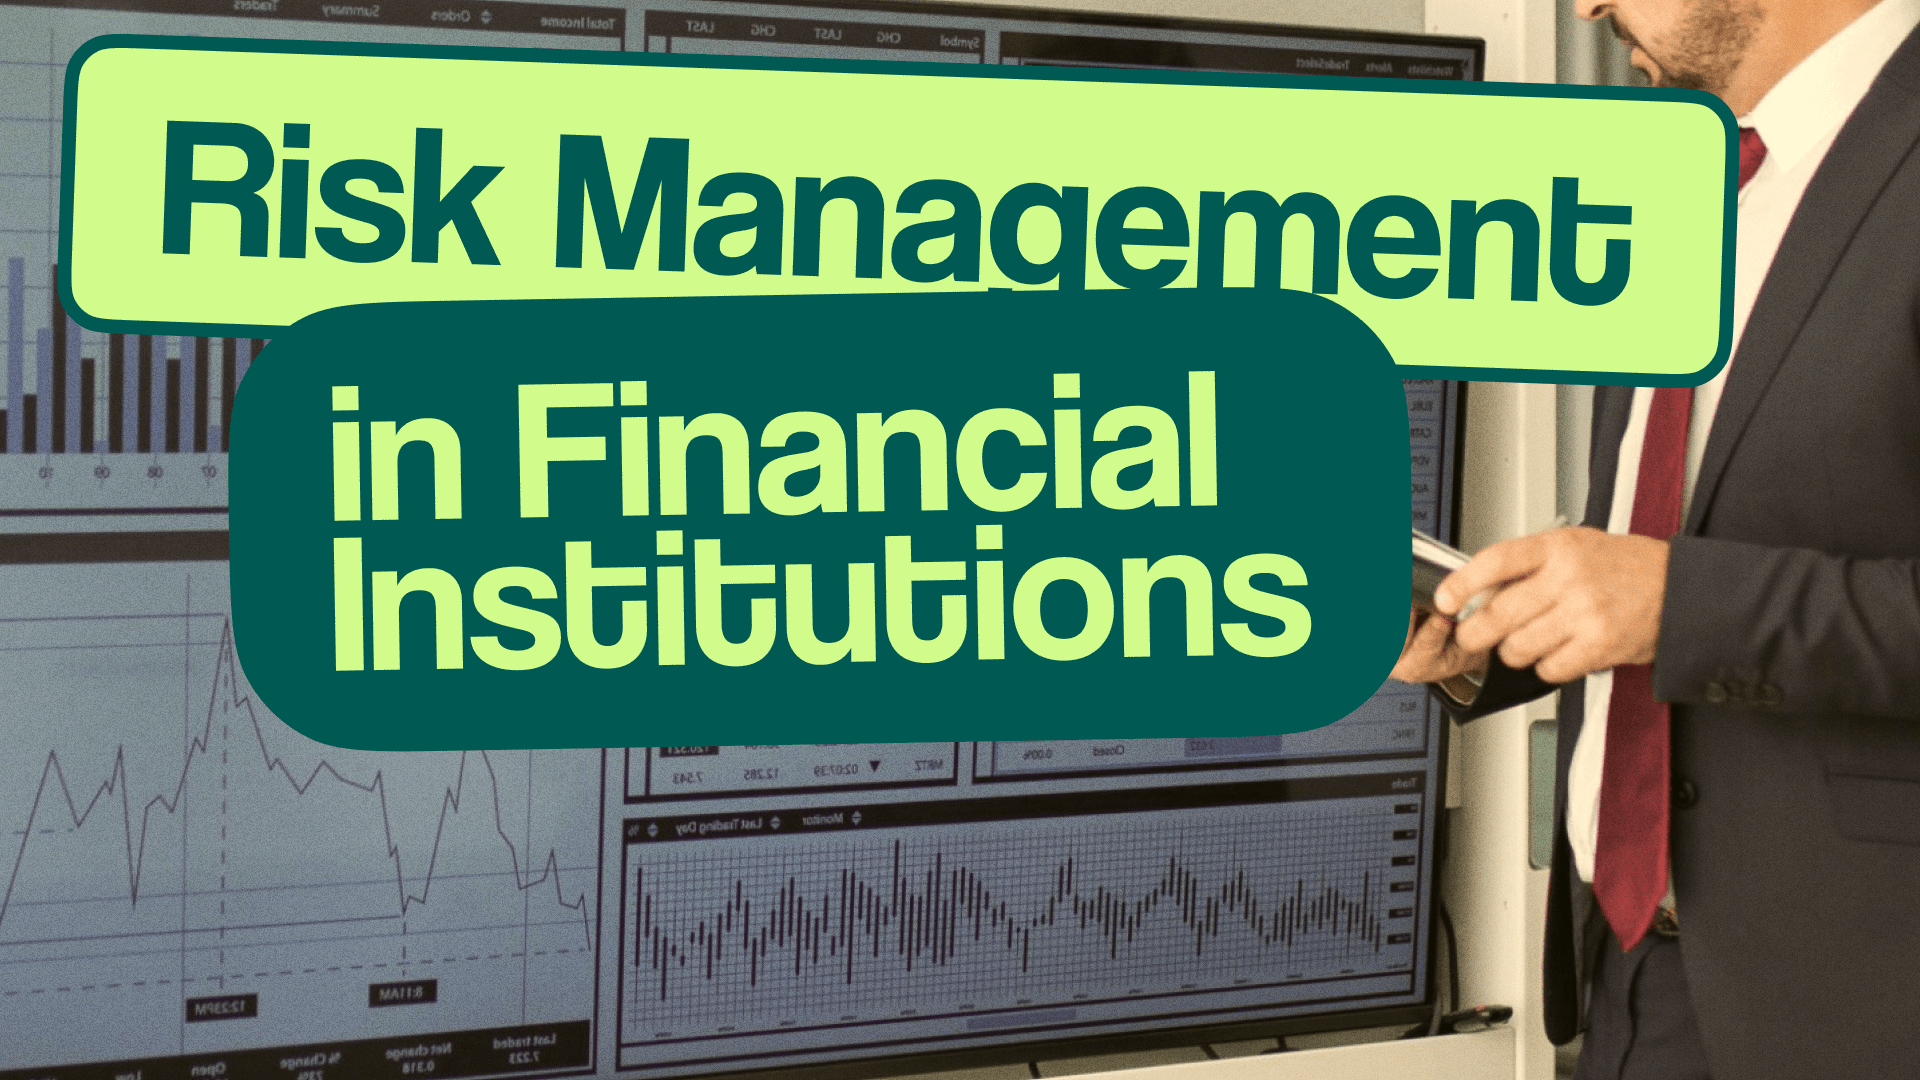 Risk Management in Financial Institutions: a guide